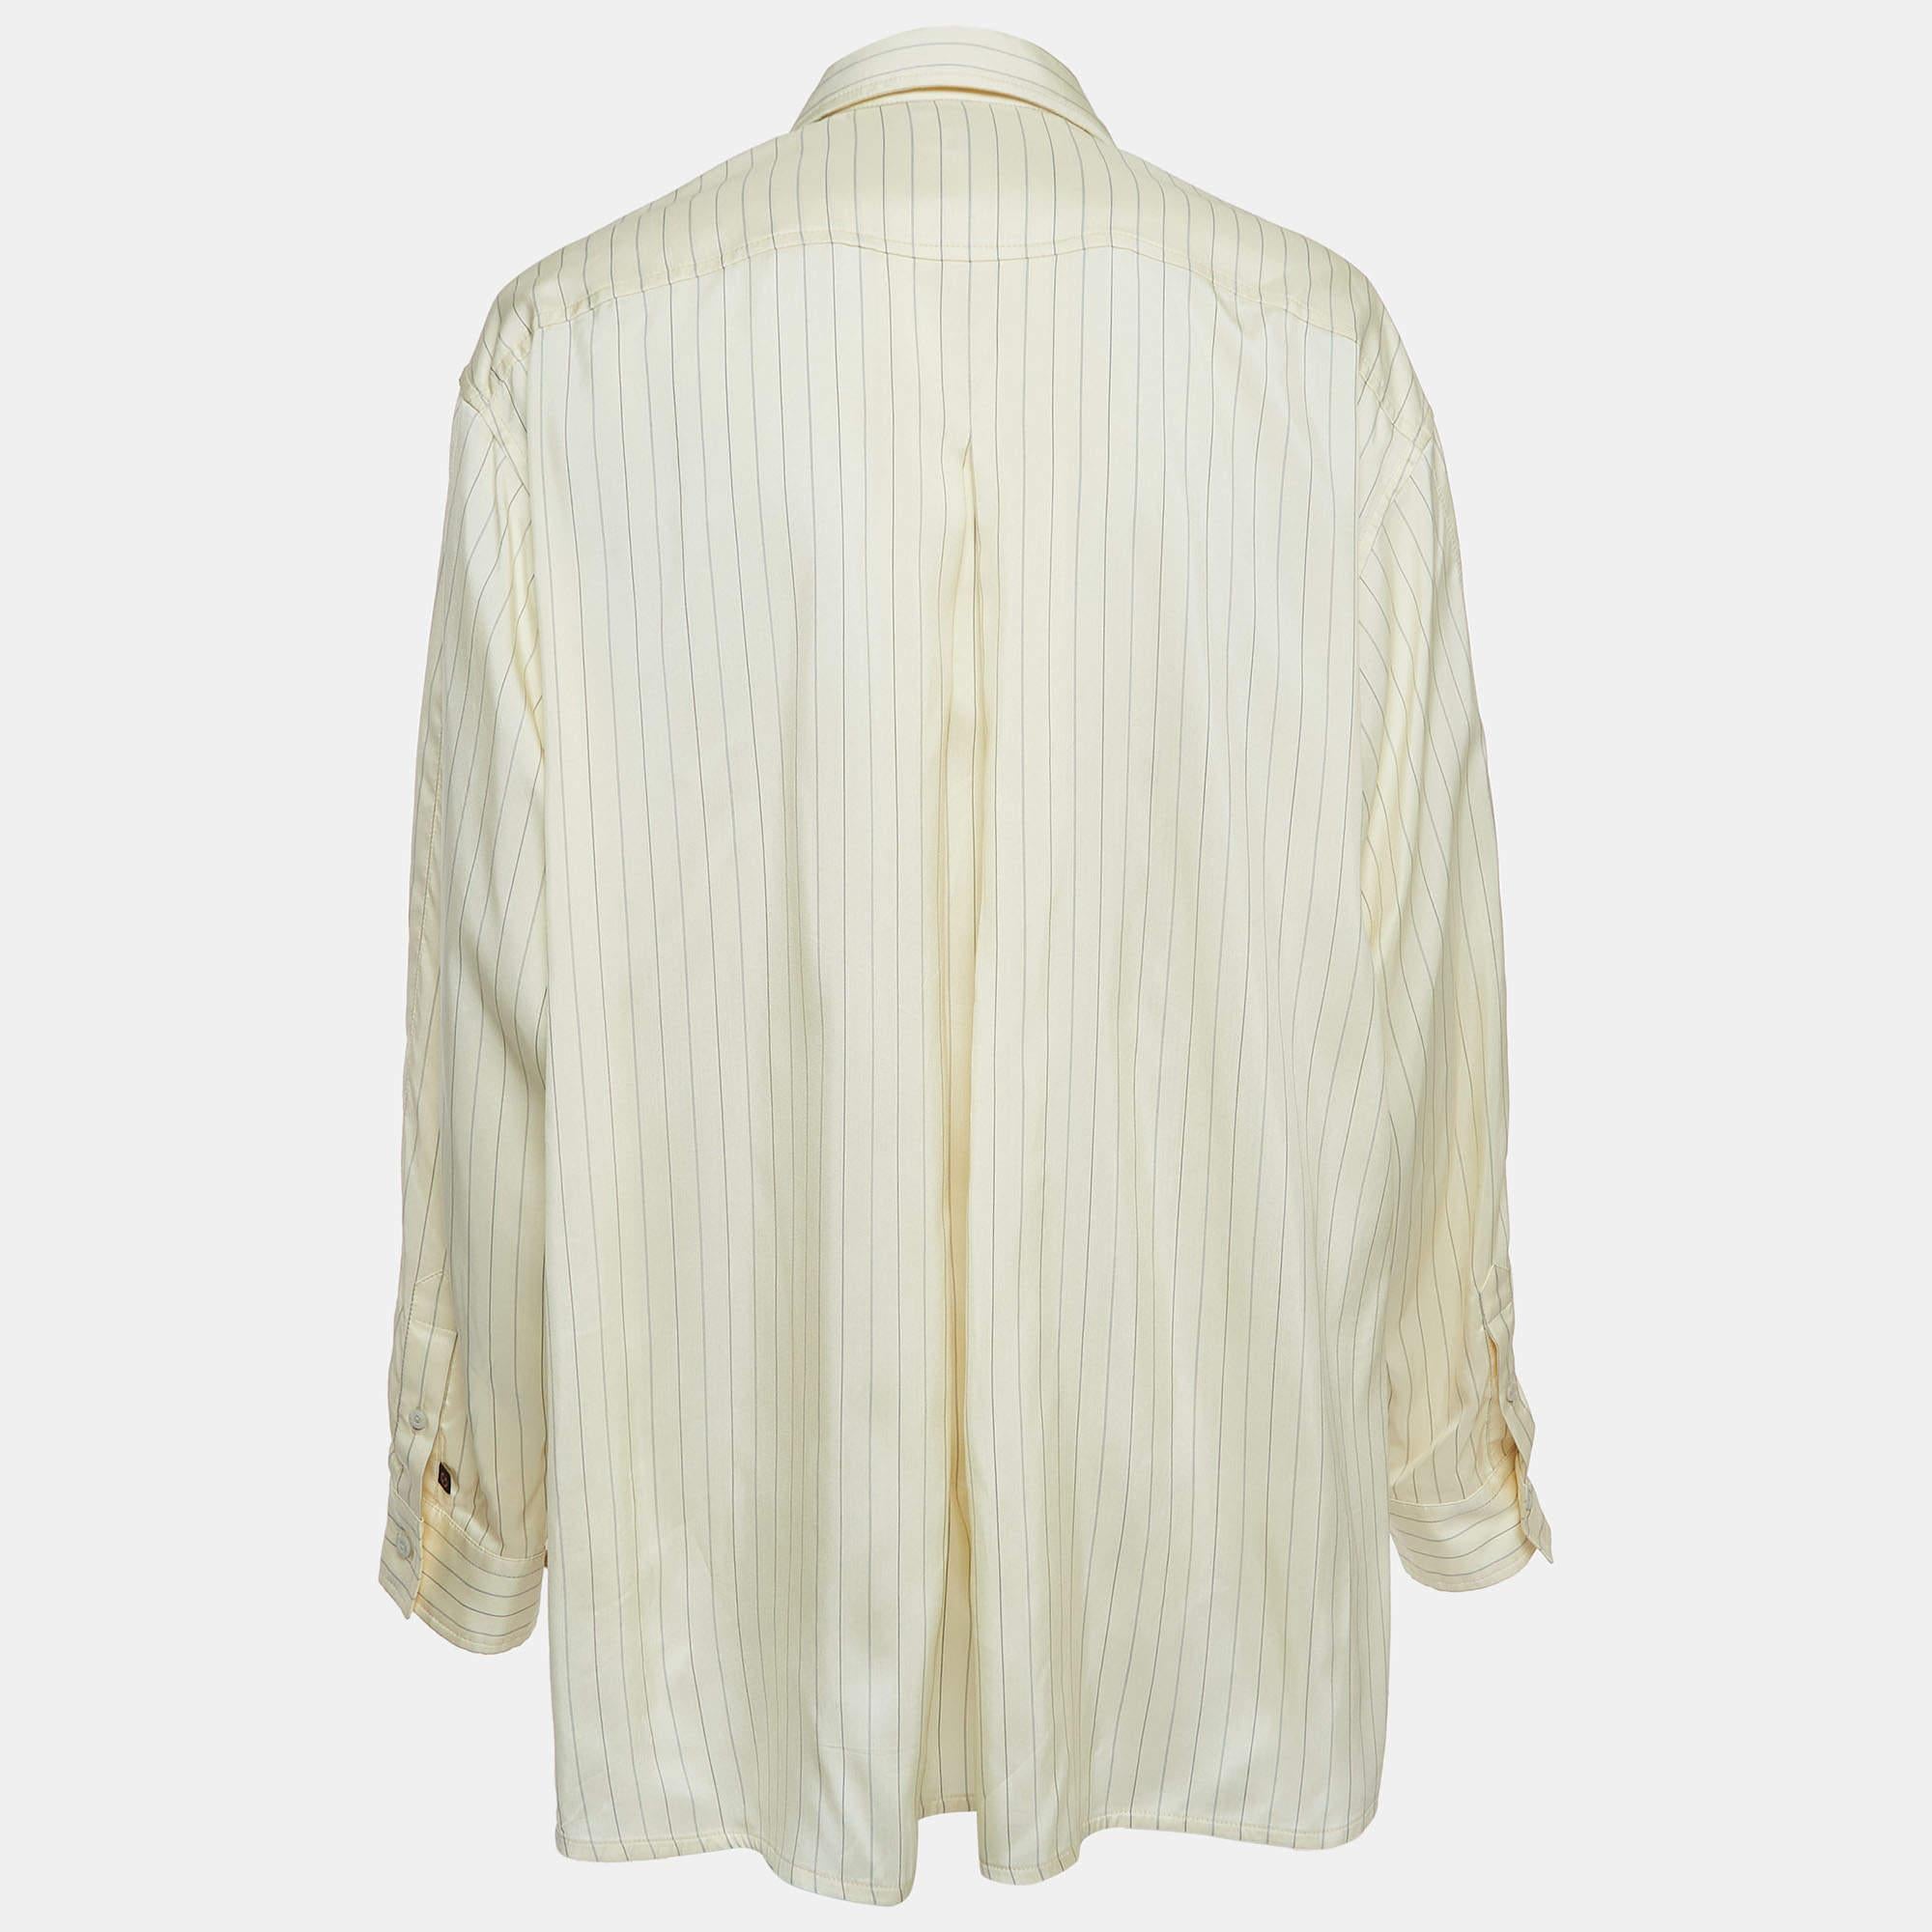 The Louis Vuitton shirt is a luxurious blend of sophistication and style. Crafted from sumptuous silk, it features subtle beige pinstripes, a unique dipped hem design, and a sleek zip-up closure, exuding elegance and modernity.

Includes: lv hanger,